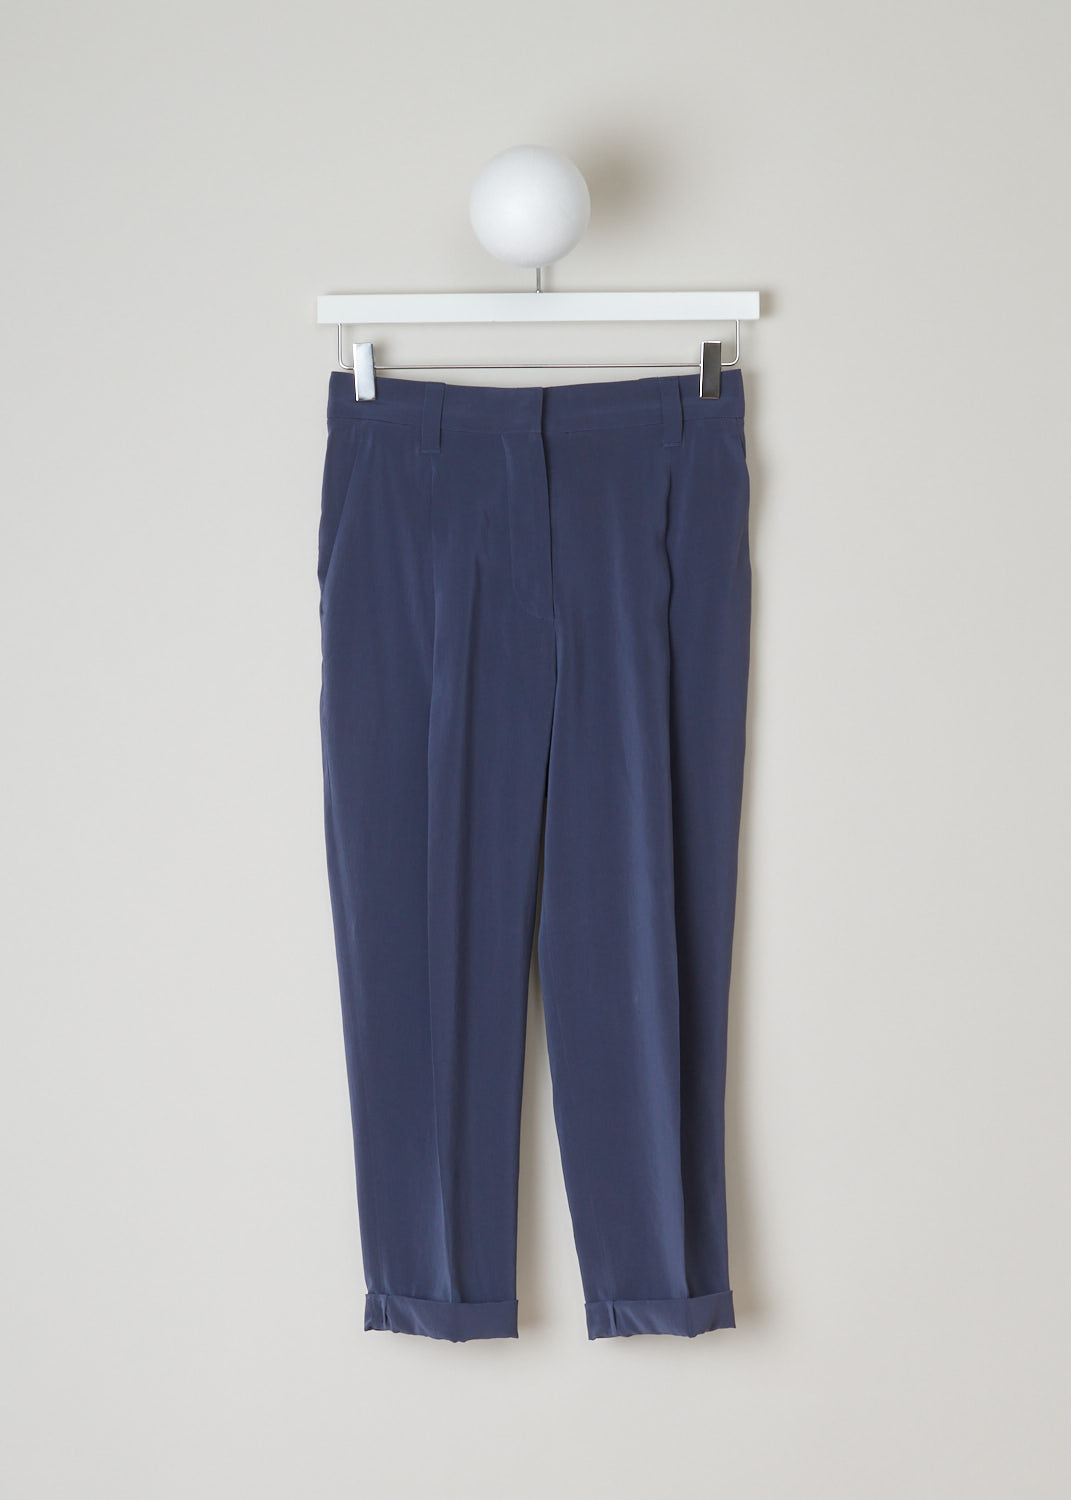 Brunello Cucinelli, Blue silk pants, M0F51P1362_C2435, blue, front, Blue pants with a slight shine to it. Featuring a single pleat and forward slanted pockets. As your closure option this model has a zipper with a metal hook and a backing button. The cropped length with the rolled up hems just adds style to these pants. On the backside you will find two welt pockets.